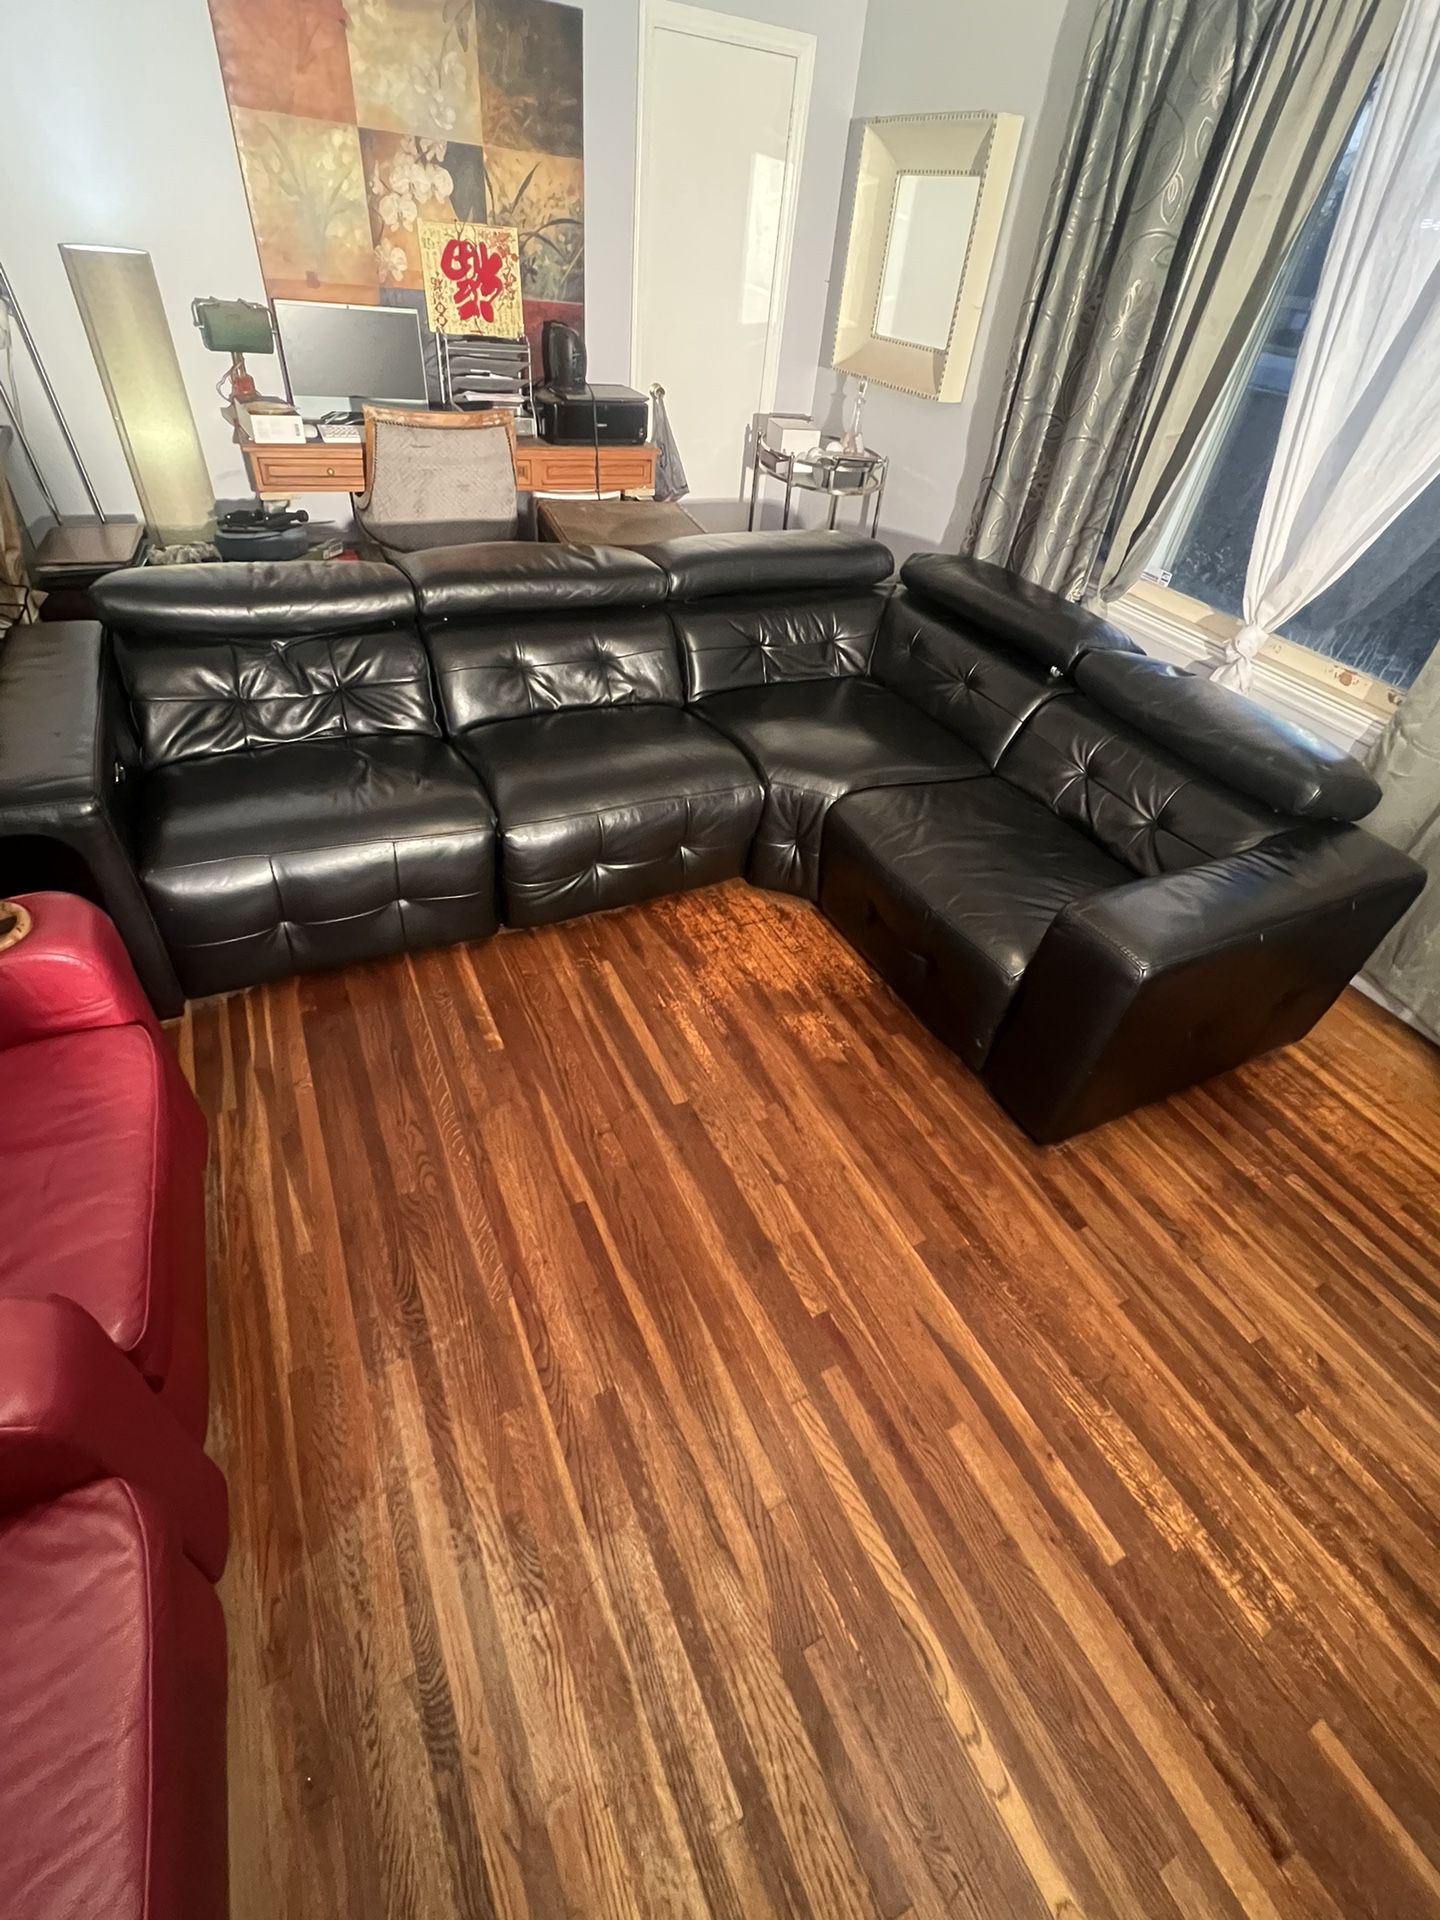 Black Faux Leather Sectional Electric Reclining Couch